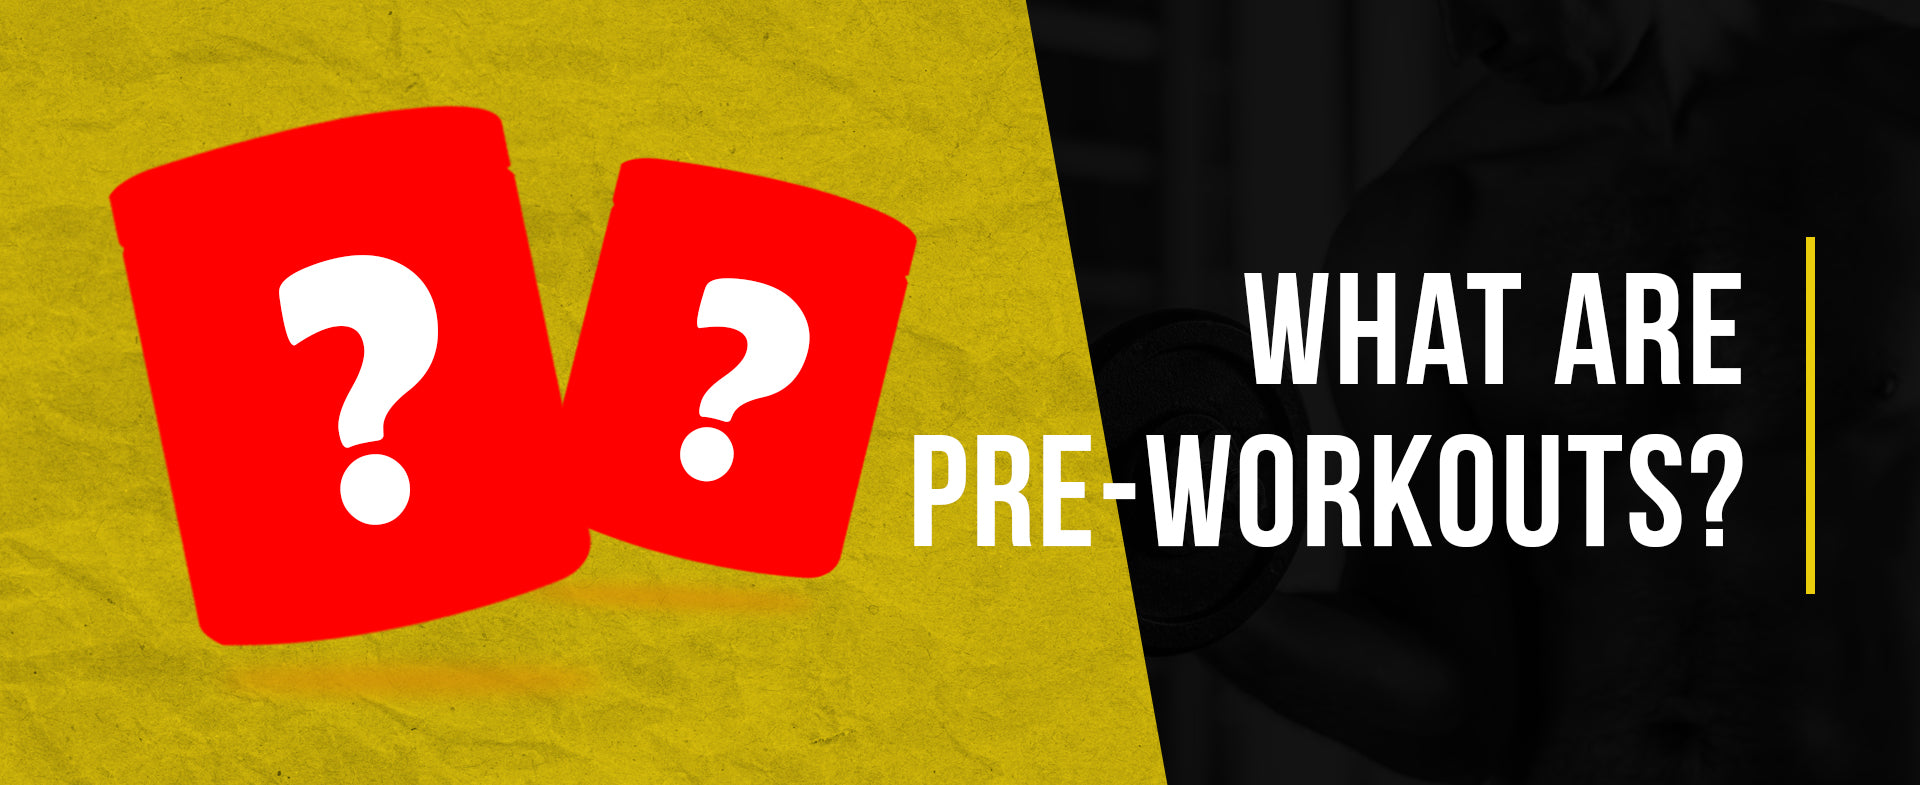 What are pre-workouts?